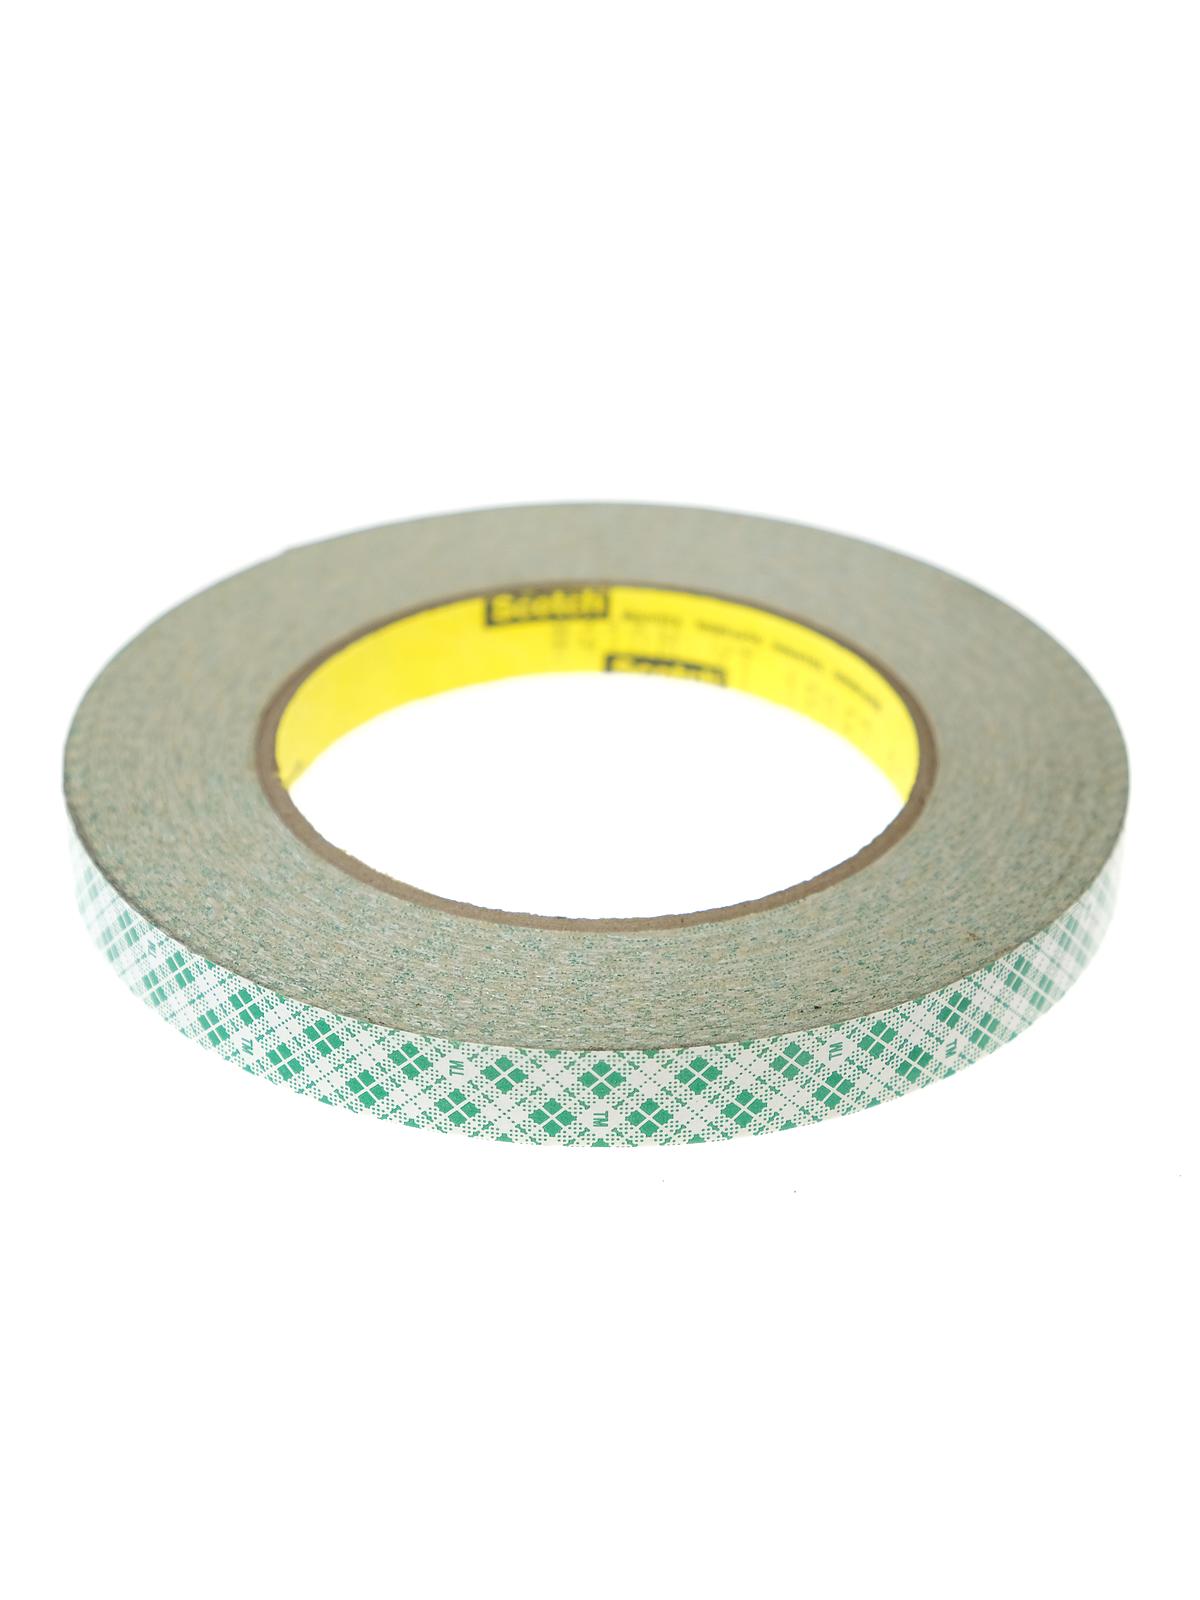 Double Coated Tissue Tape 1 2 In. X 36 Yd.